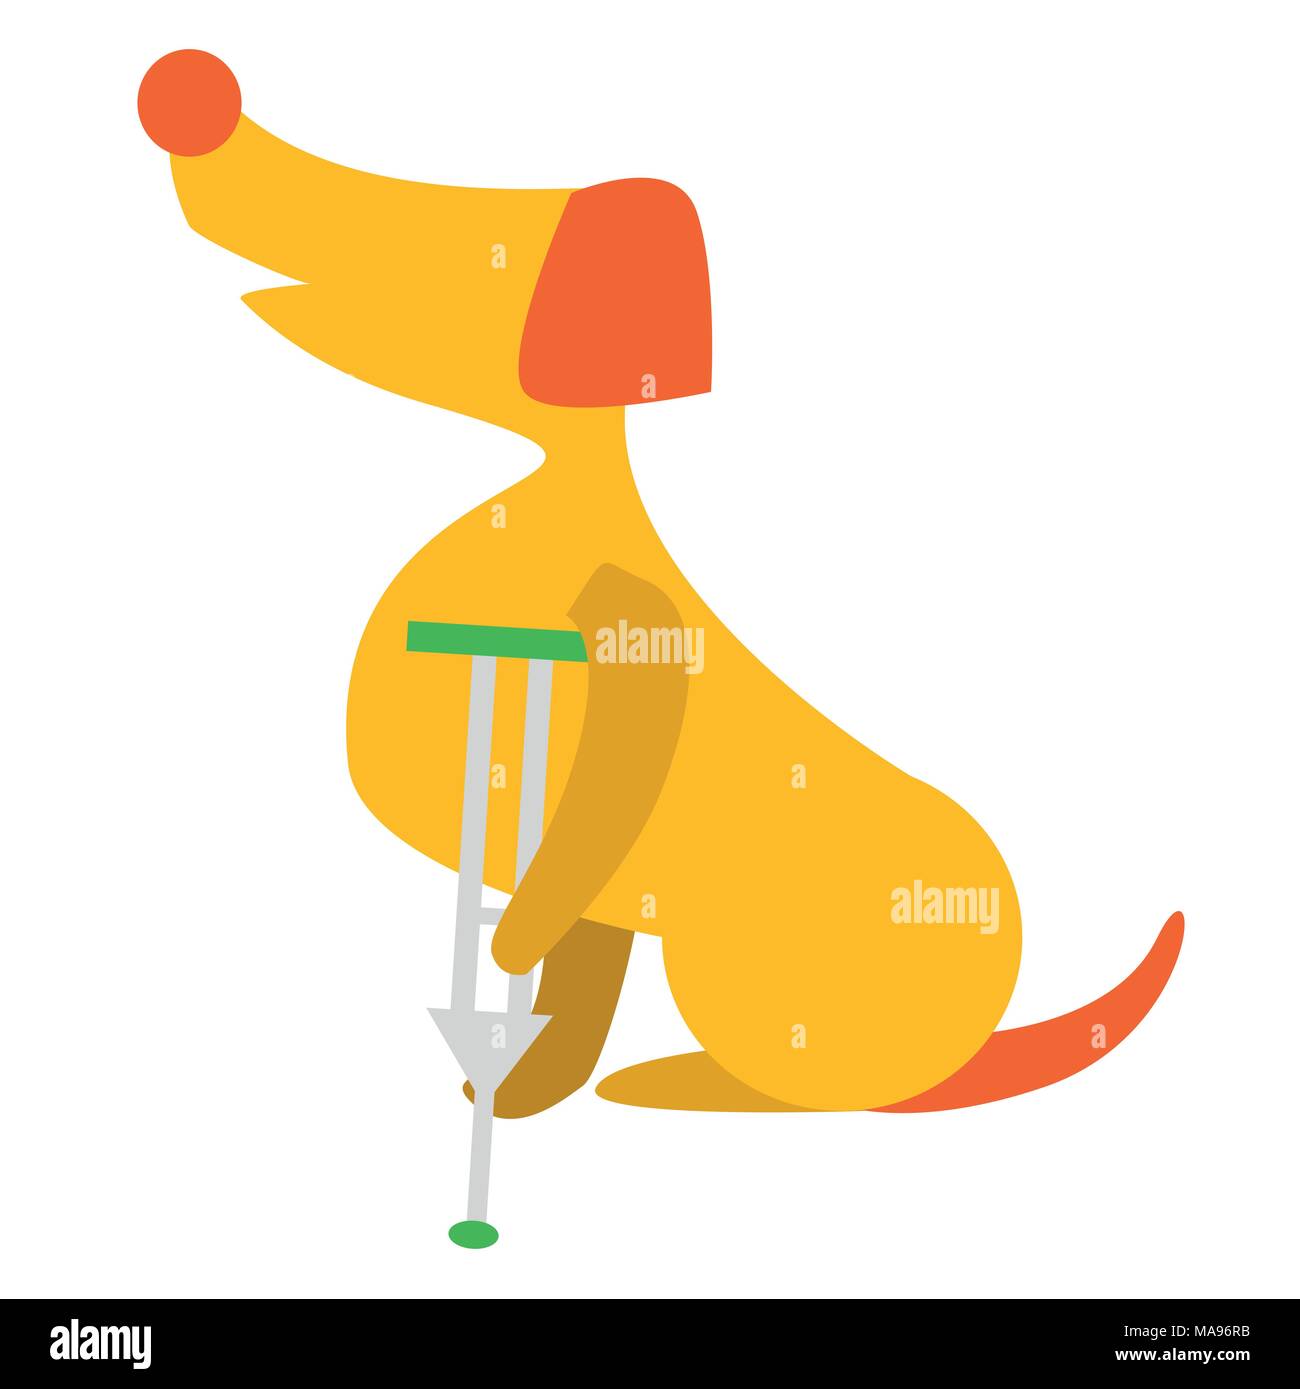 Vector Illustration Of Cute Dog Or Puppy. Sick Dog With wounded Leg. Veterinary Stock Vector